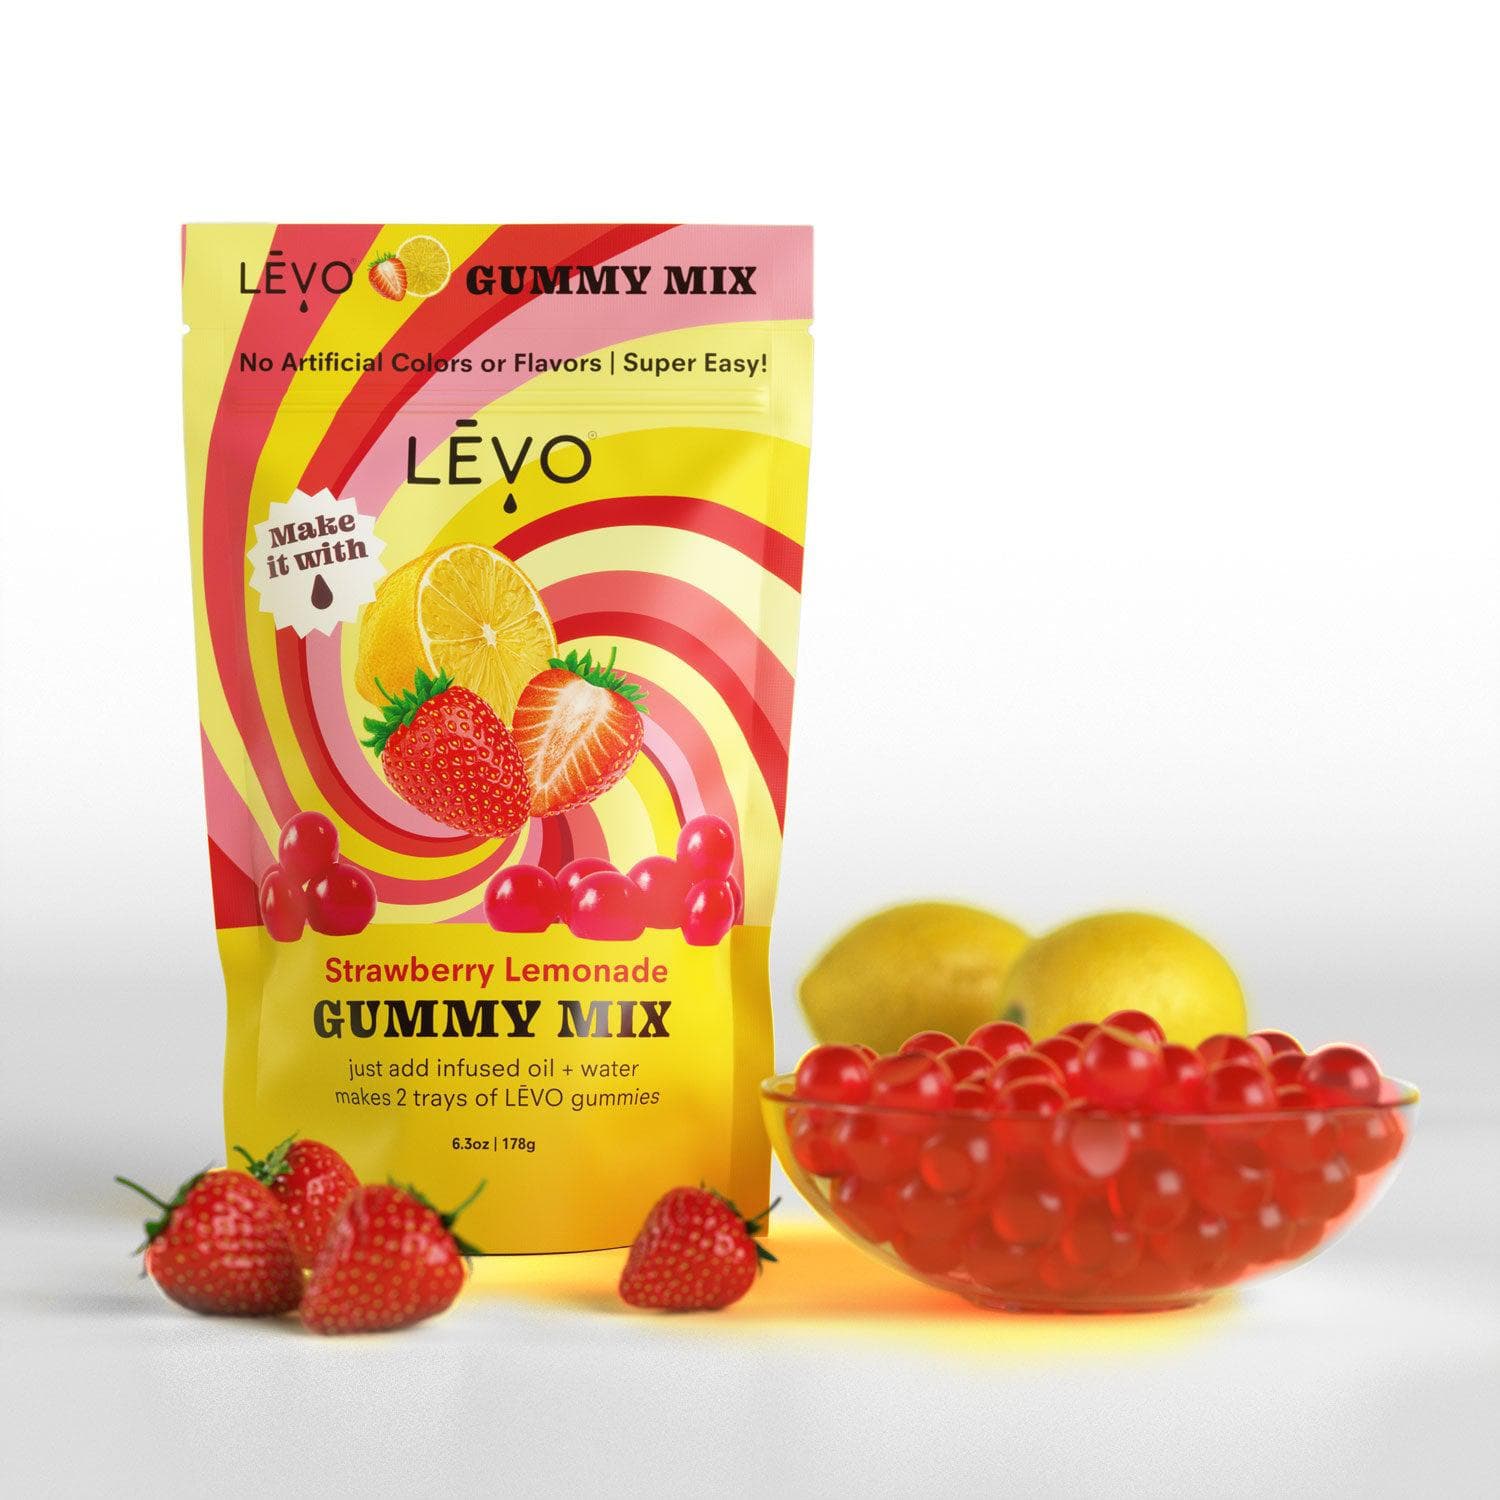 Strawberry Lemonade gummy mix, made with all natural colors and flavors. Make your own dosed edible gummies at home, and save 10x the cost of buying pre-made. LEVO pays for itself compared to buying tinctures and gummies at the store.